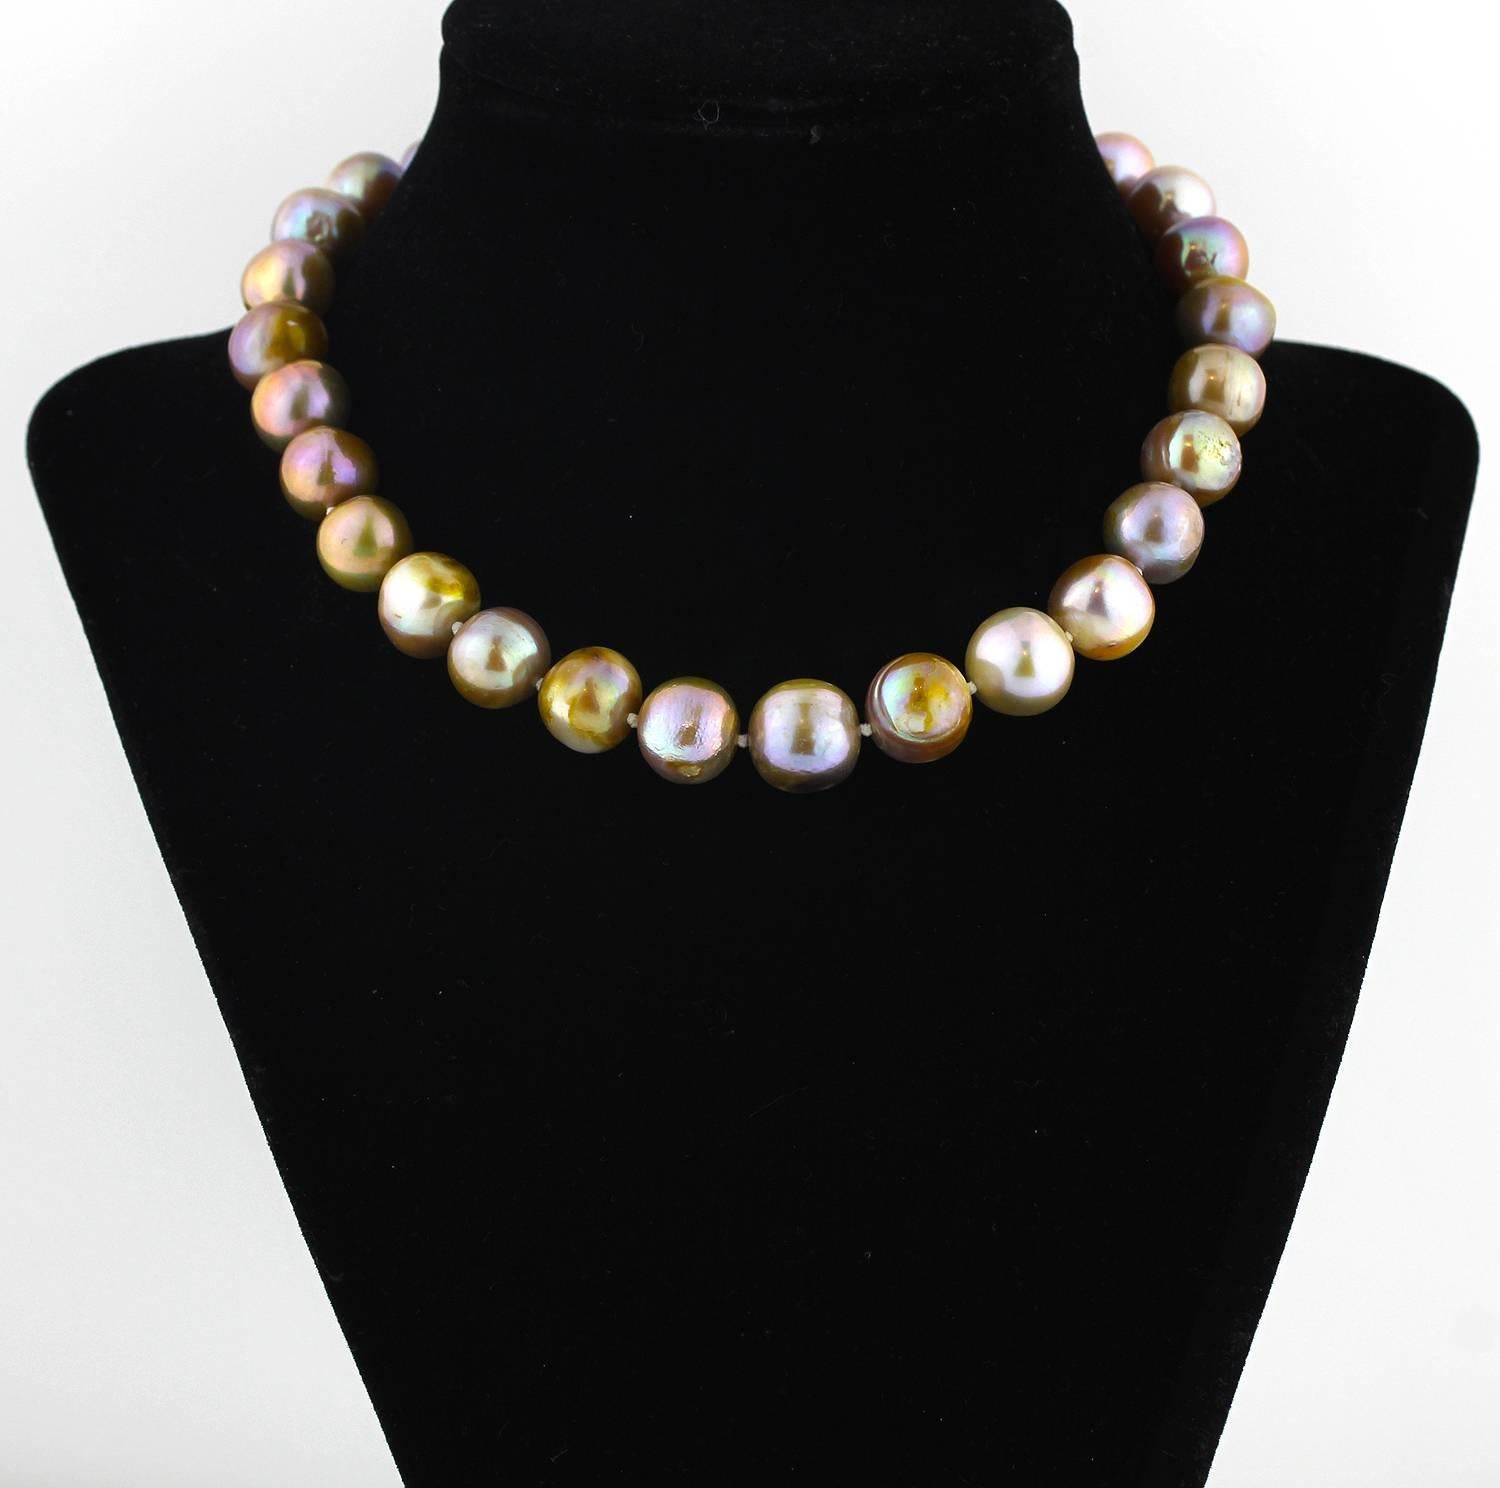 A choker of cultured Fireball iridescent ringed Pearls with a mind of their own  (which reflect different colors on different backgrounds)
Size:  approximately 13 mm
Length:  15 inches
Clasp:  silver tone